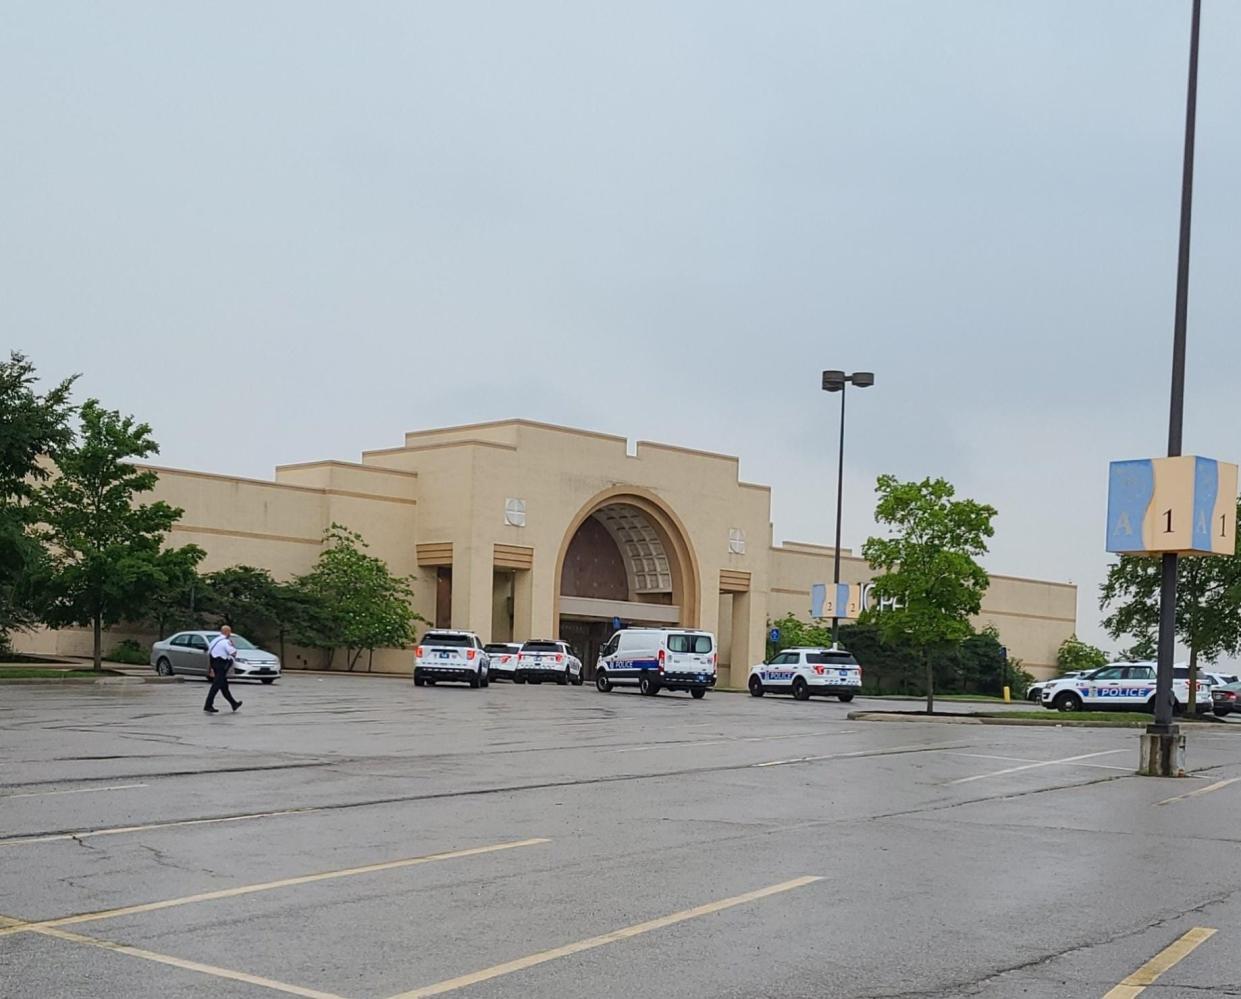 Tyrone Gray Jr., 24, of Mansfield, has been charged with murder after shooting 25-year-old Dontarious Sylvester, also of Mansfield, in the head Sunday afternoon at the Mall at Tuttle Crossing, Columbus police said. According to court records and a 911 call by Gray, Gray shot the victim because Sylvester hit him in the head with a purse.